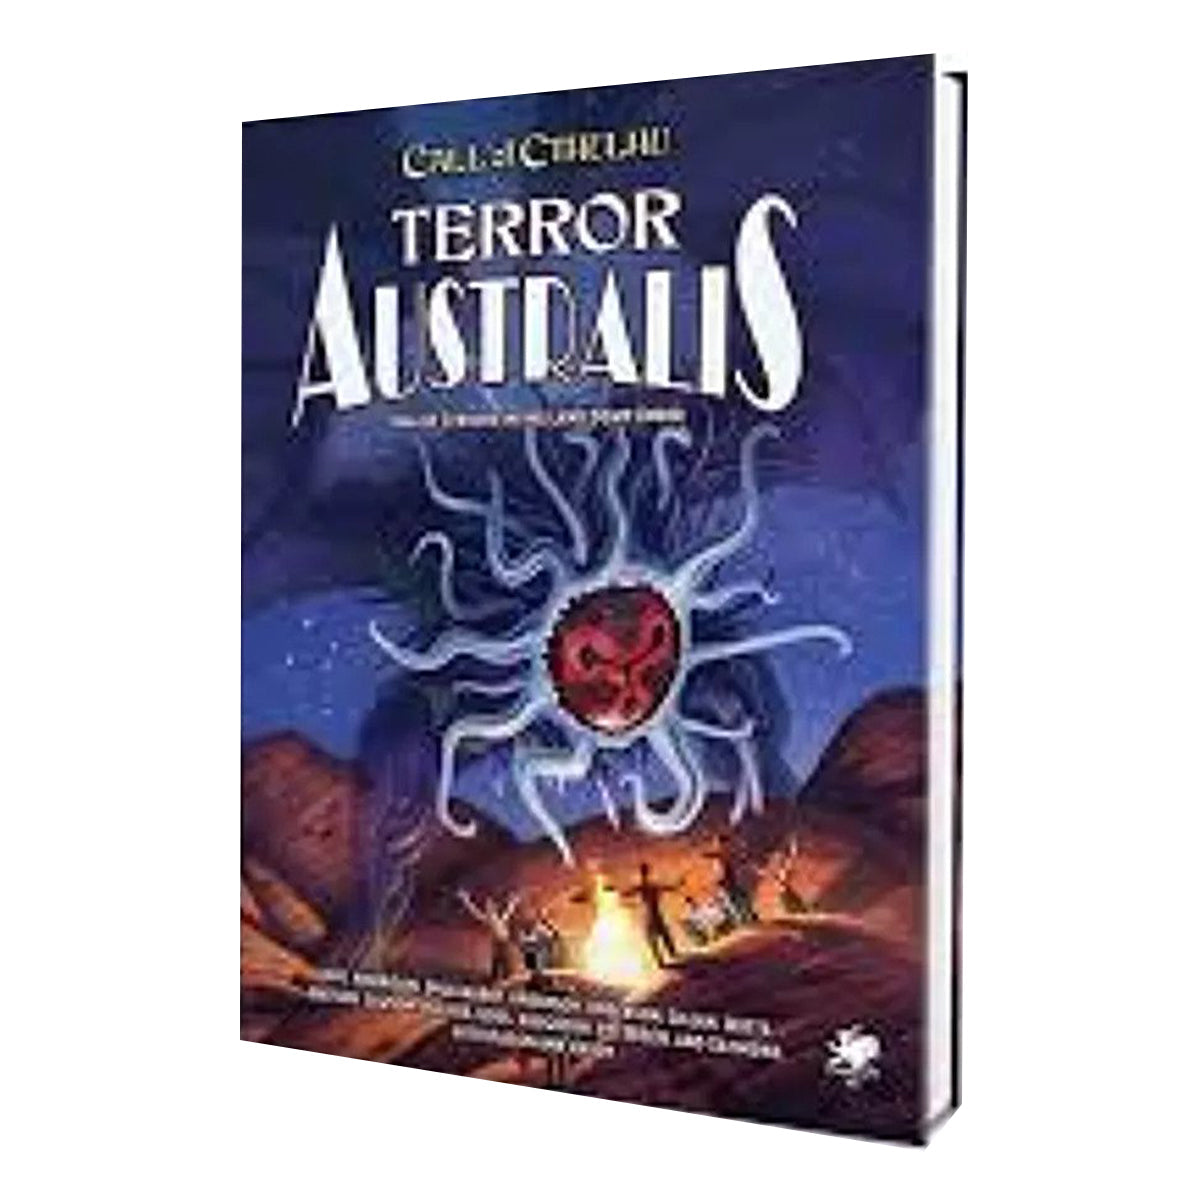 Call of Cthulhu RPG - Terror Australis 2nd Edition